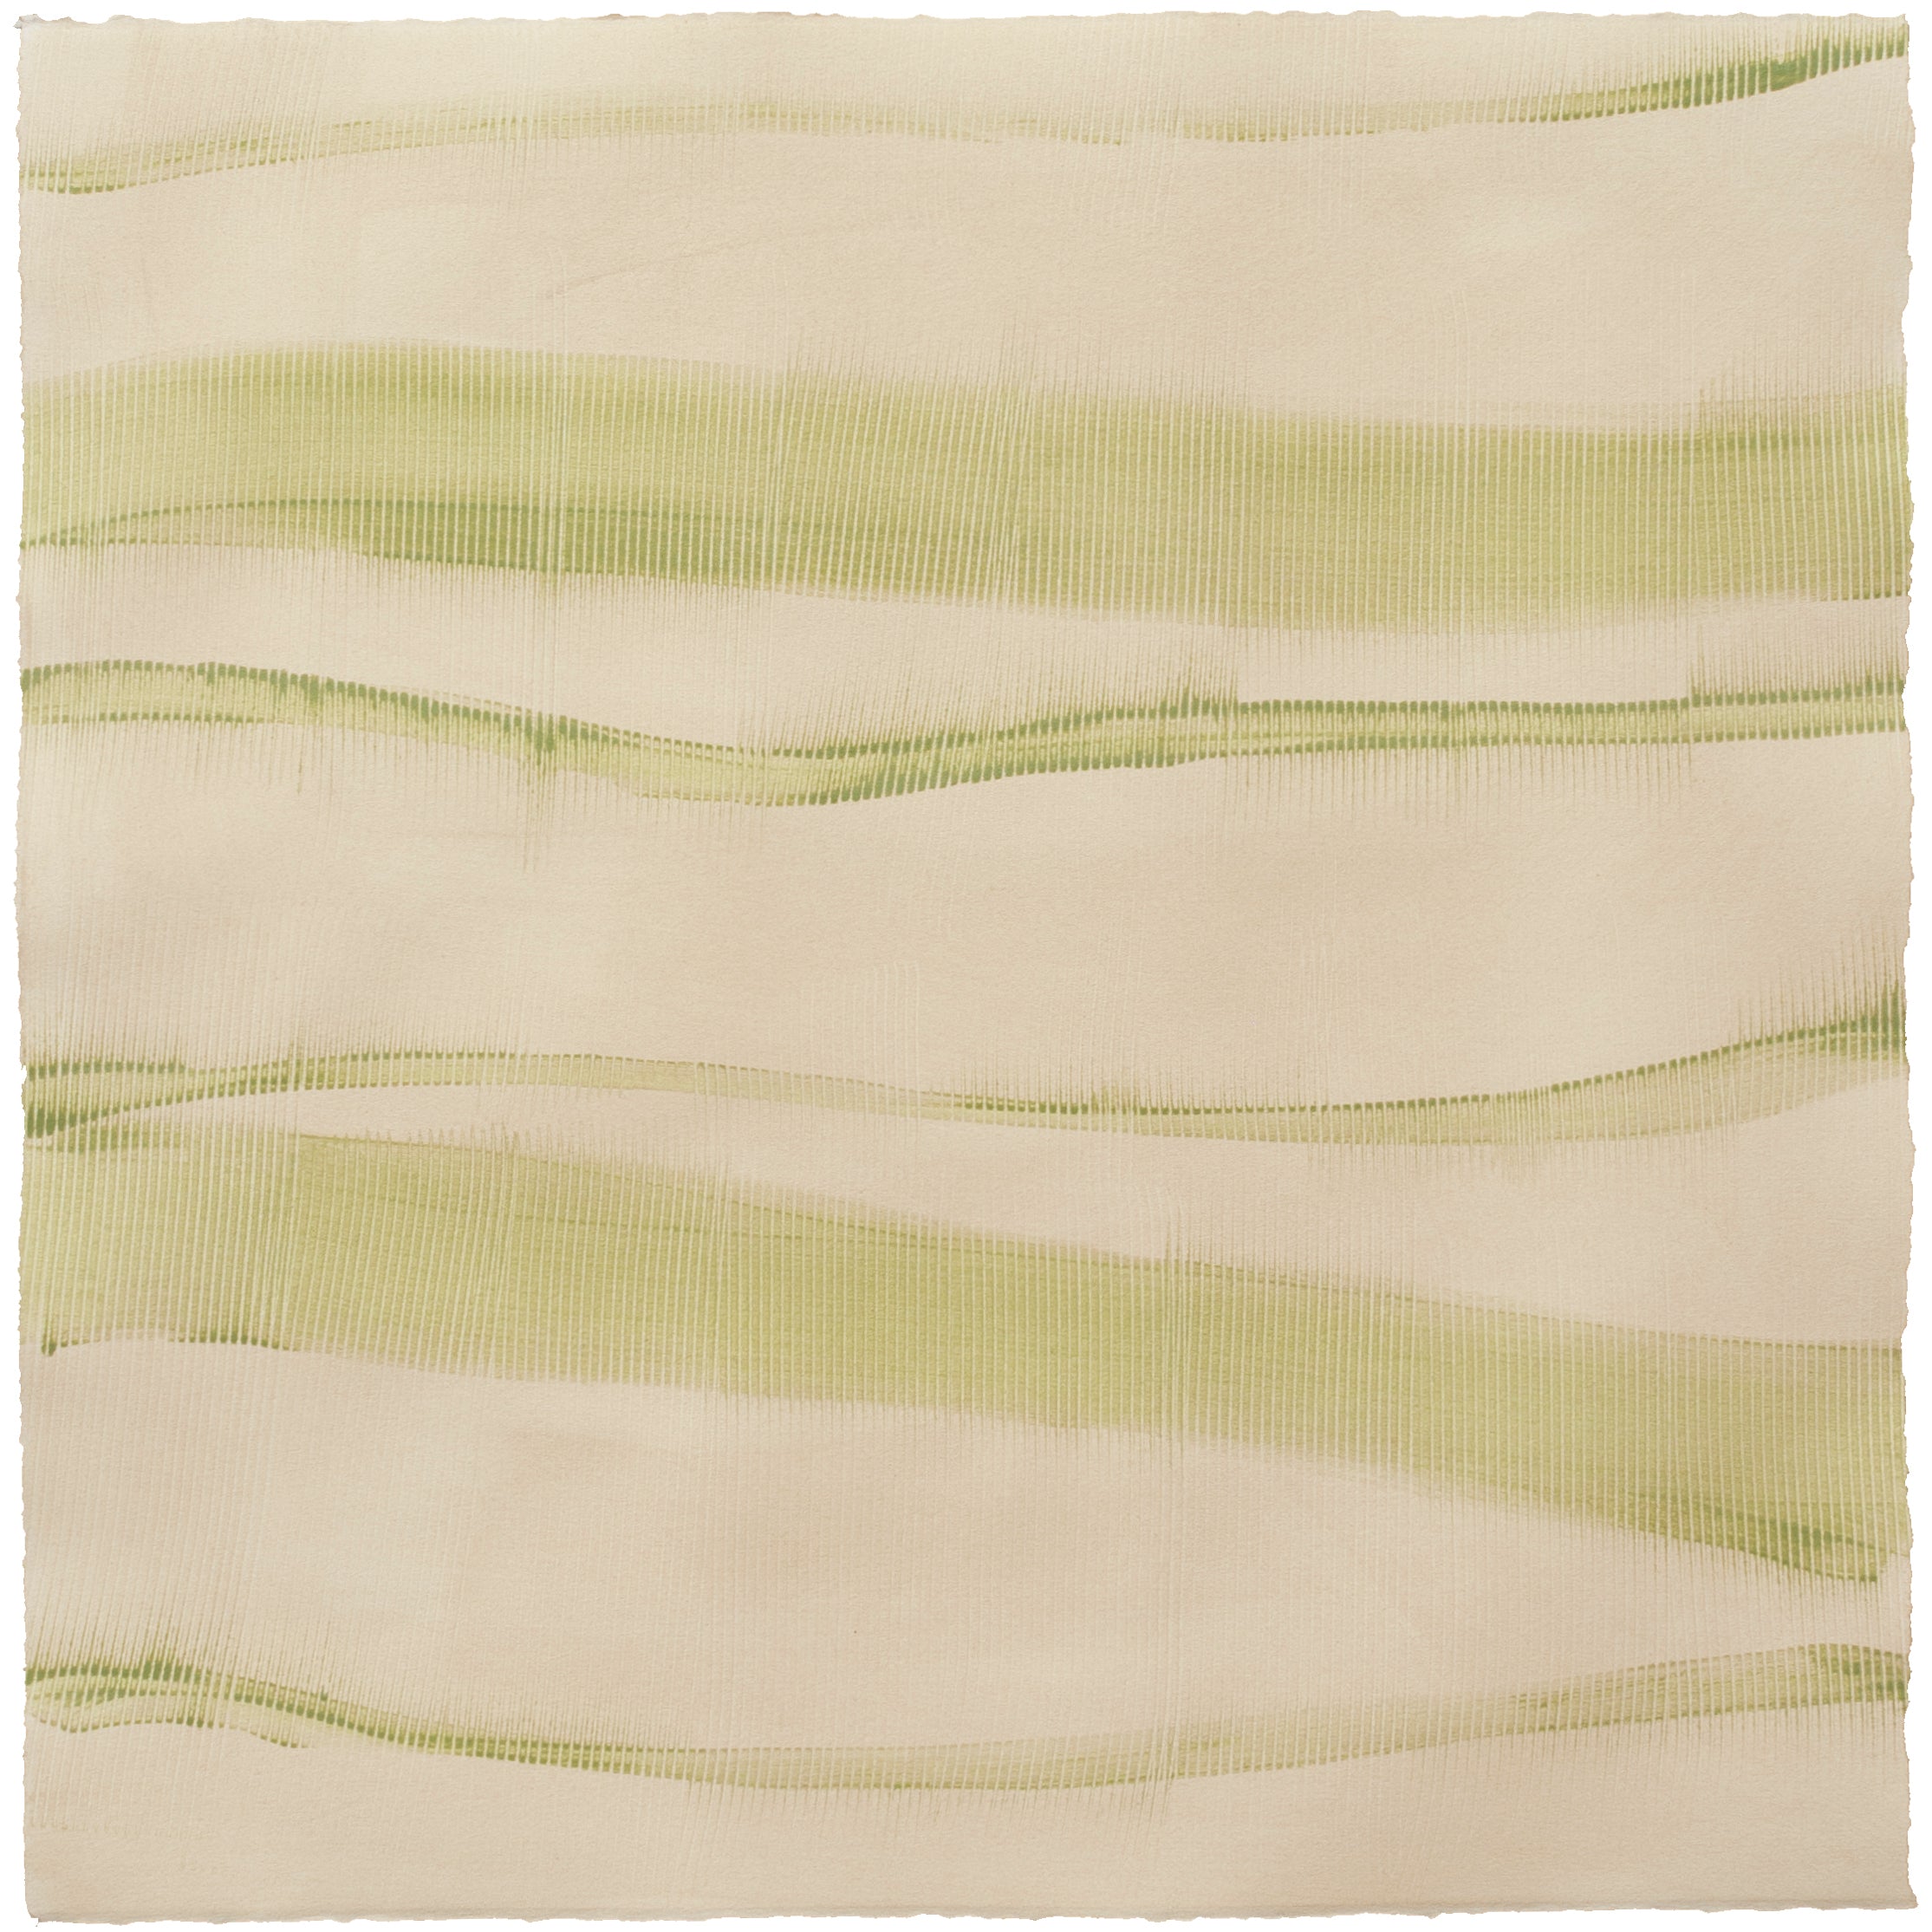 Sheet of hand-painted wallpaper with an irregular combed stripe pattern in olive on a cream field.